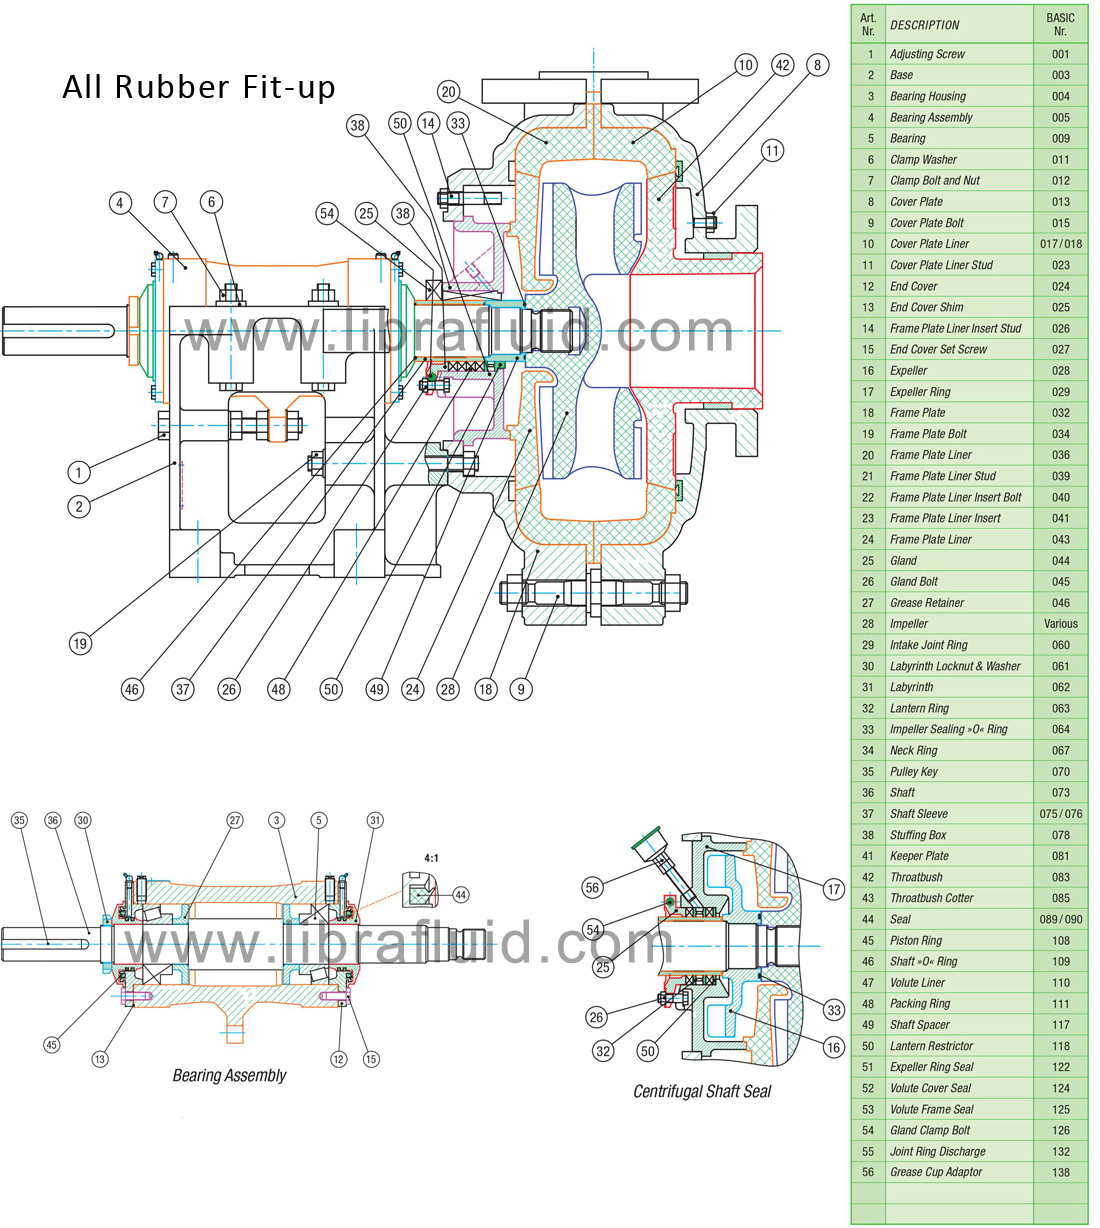 Rubber slurry pump assembly drawing